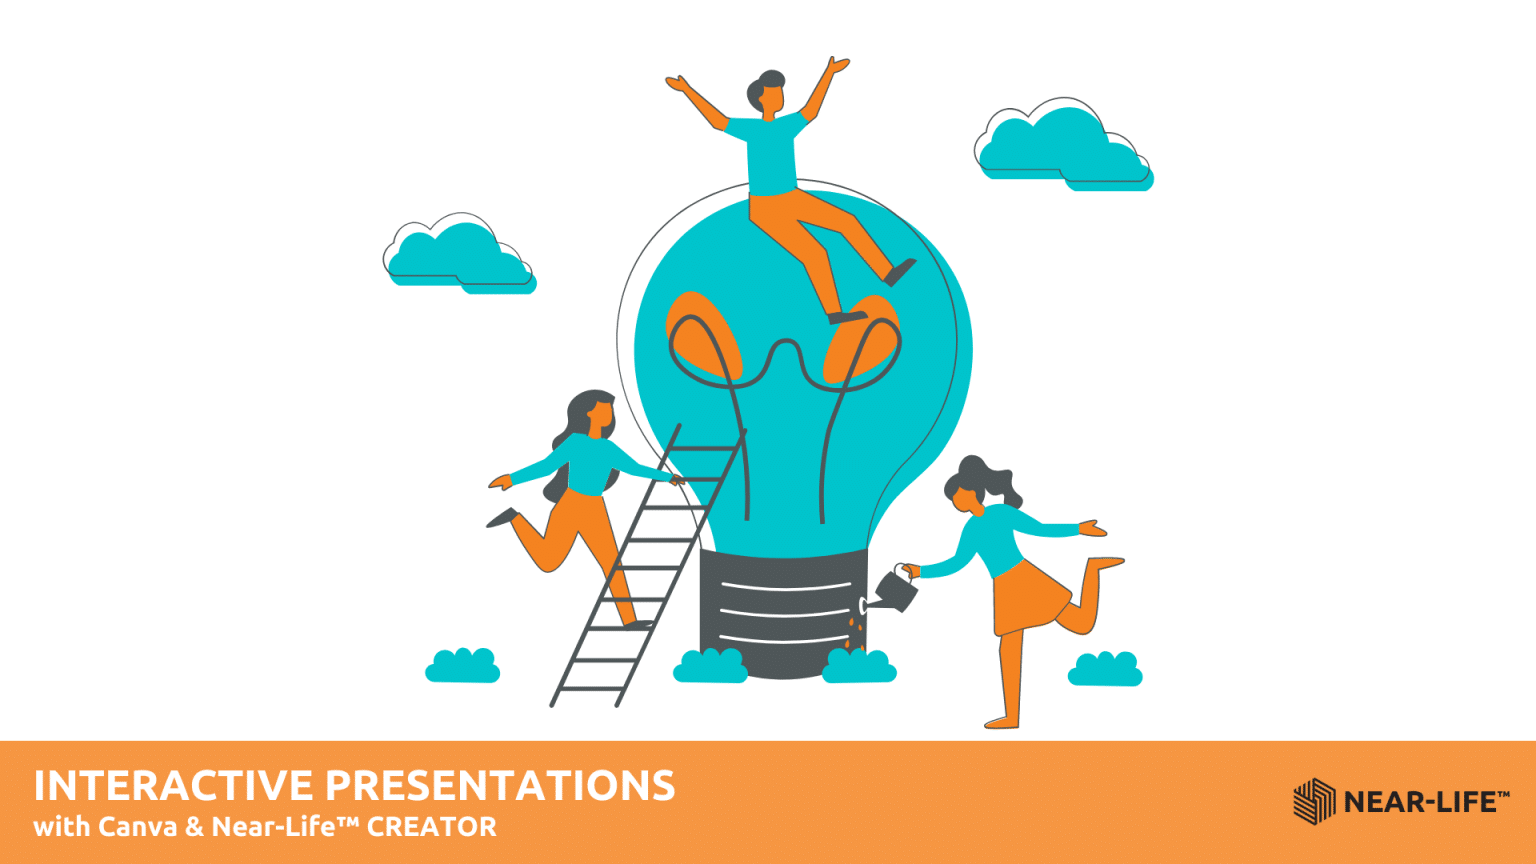 you can make presentations more interactive and intriguing by incorporating